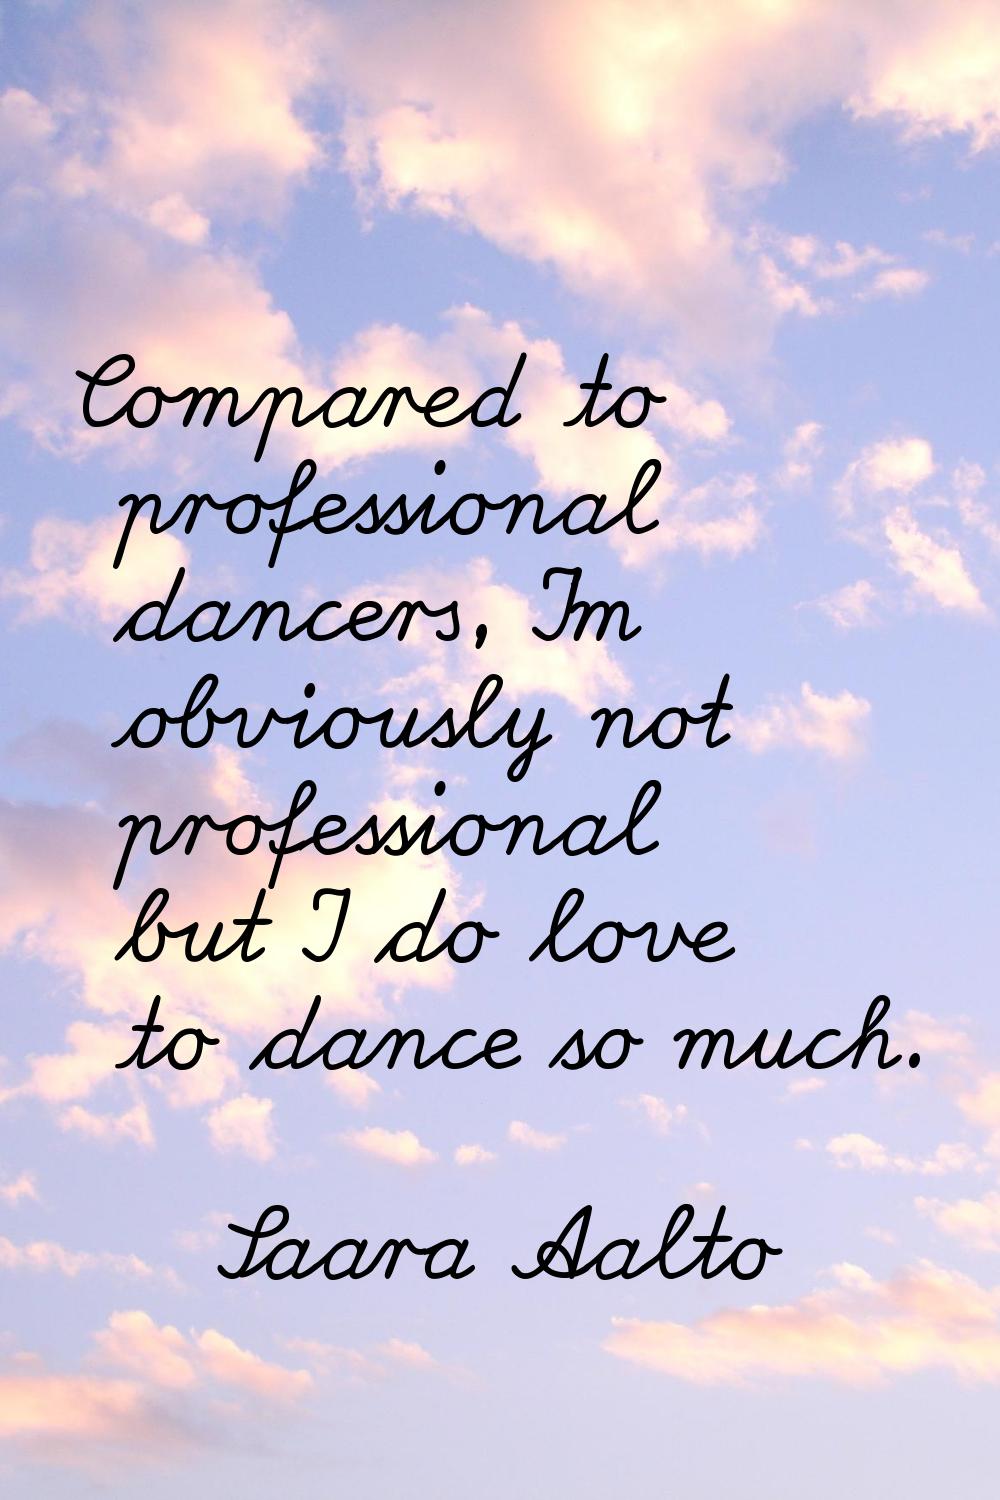 Compared to professional dancers, I'm obviously not professional but I do love to dance so much.